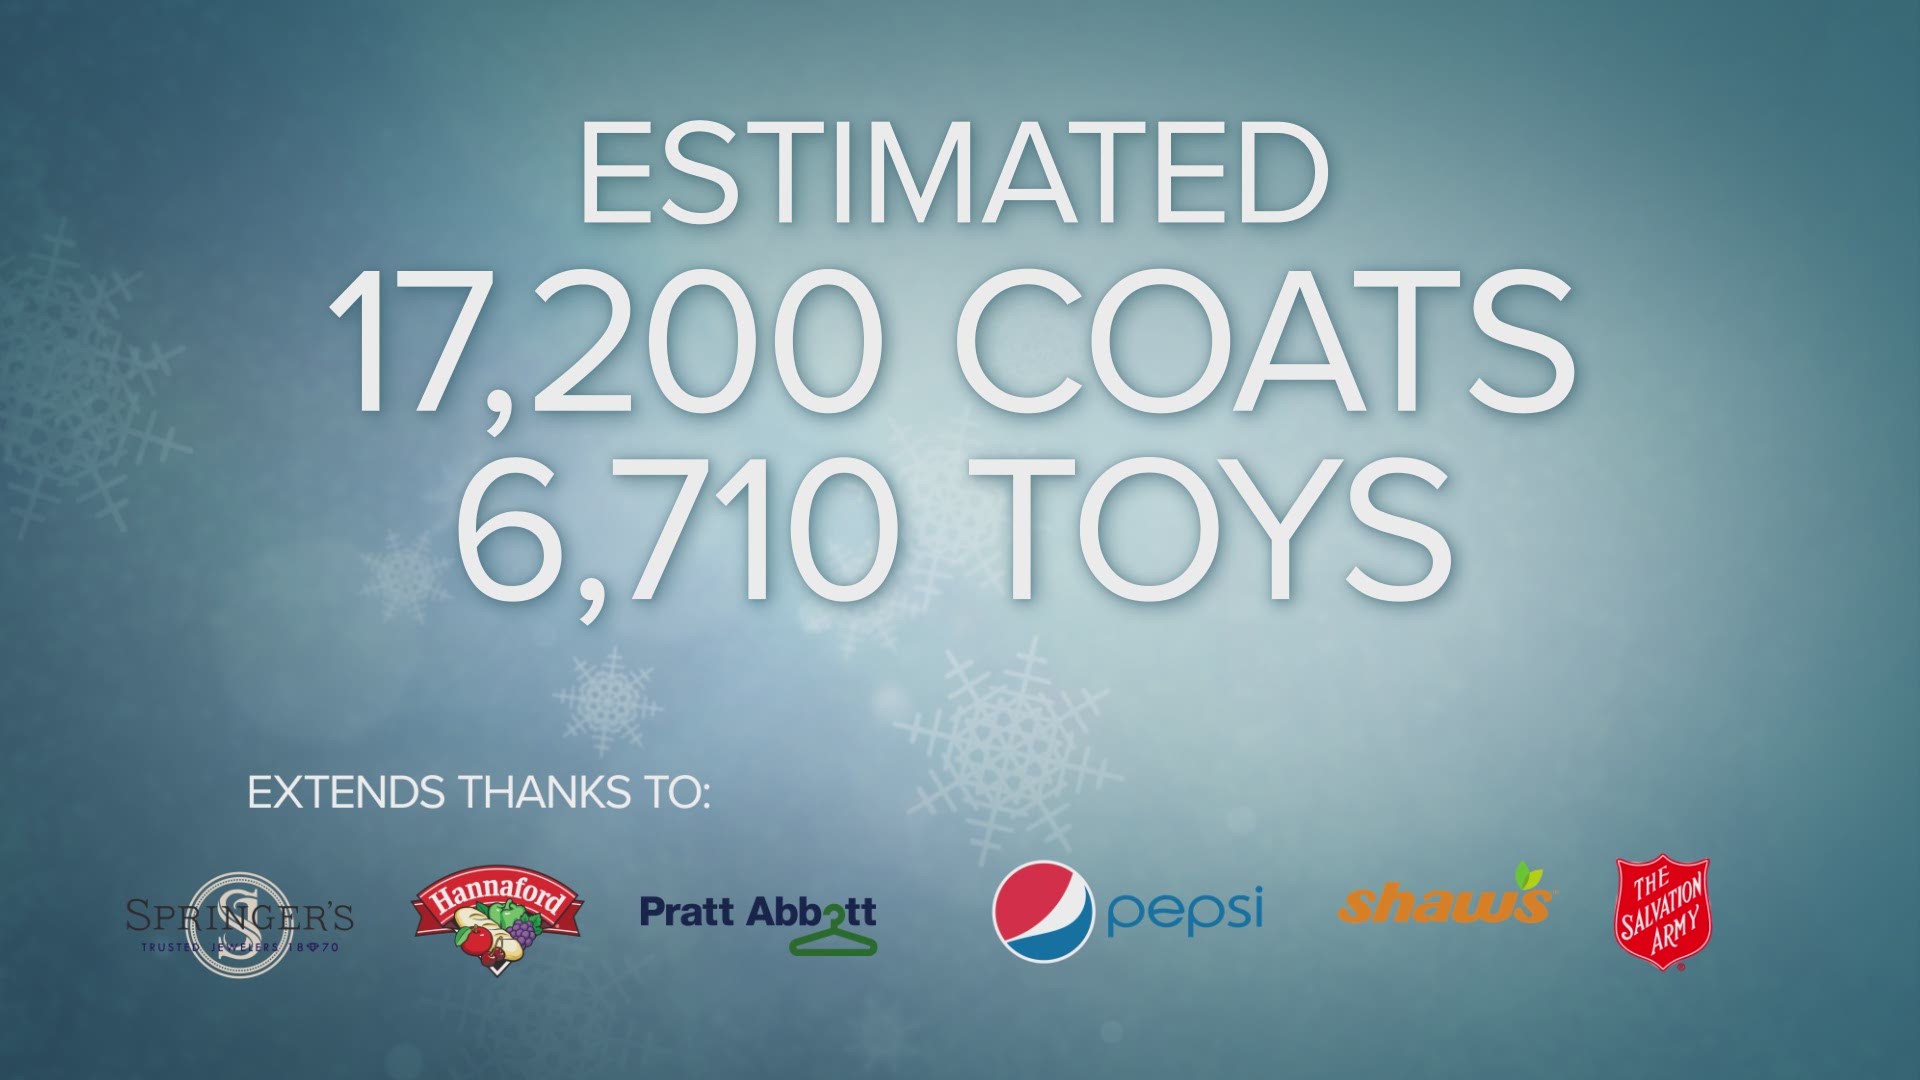 Thank you to all that donated to our 2018 Coats and Toys for Kids campaign.  17,200 coats and 6,710 toys were collected.